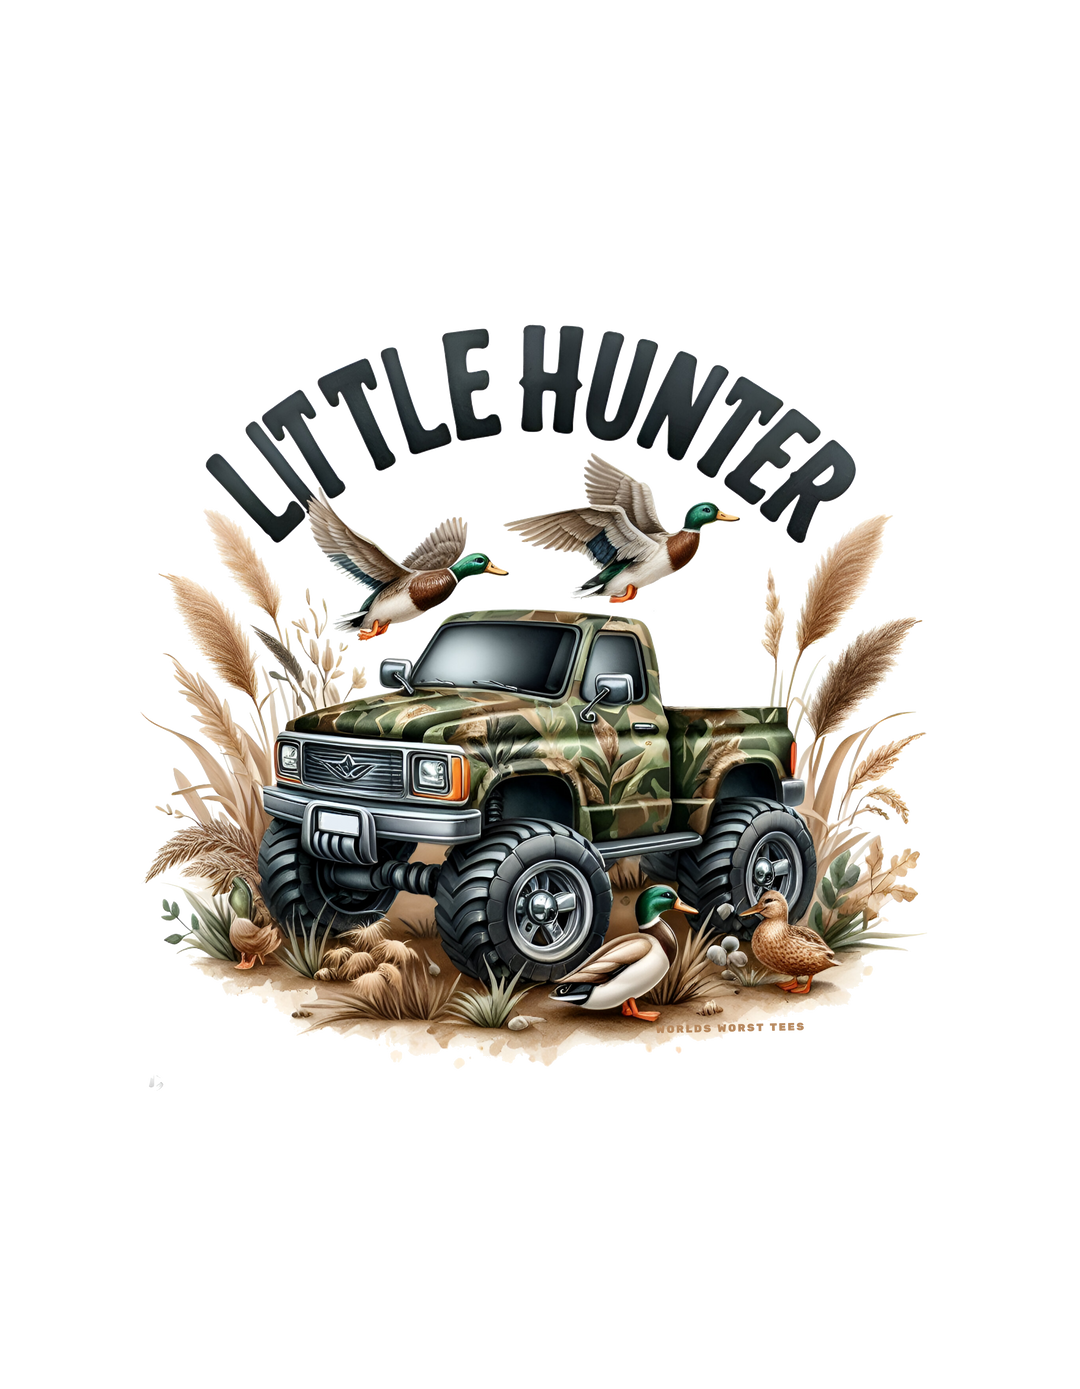 Little Hunter Toddler Tee featuring a truck with ducks and grass, a duck flying, and a tire. Soft 100% combed ringspun cotton, light fabric, tear-away label, perfect for sensitive skin and first adventures.